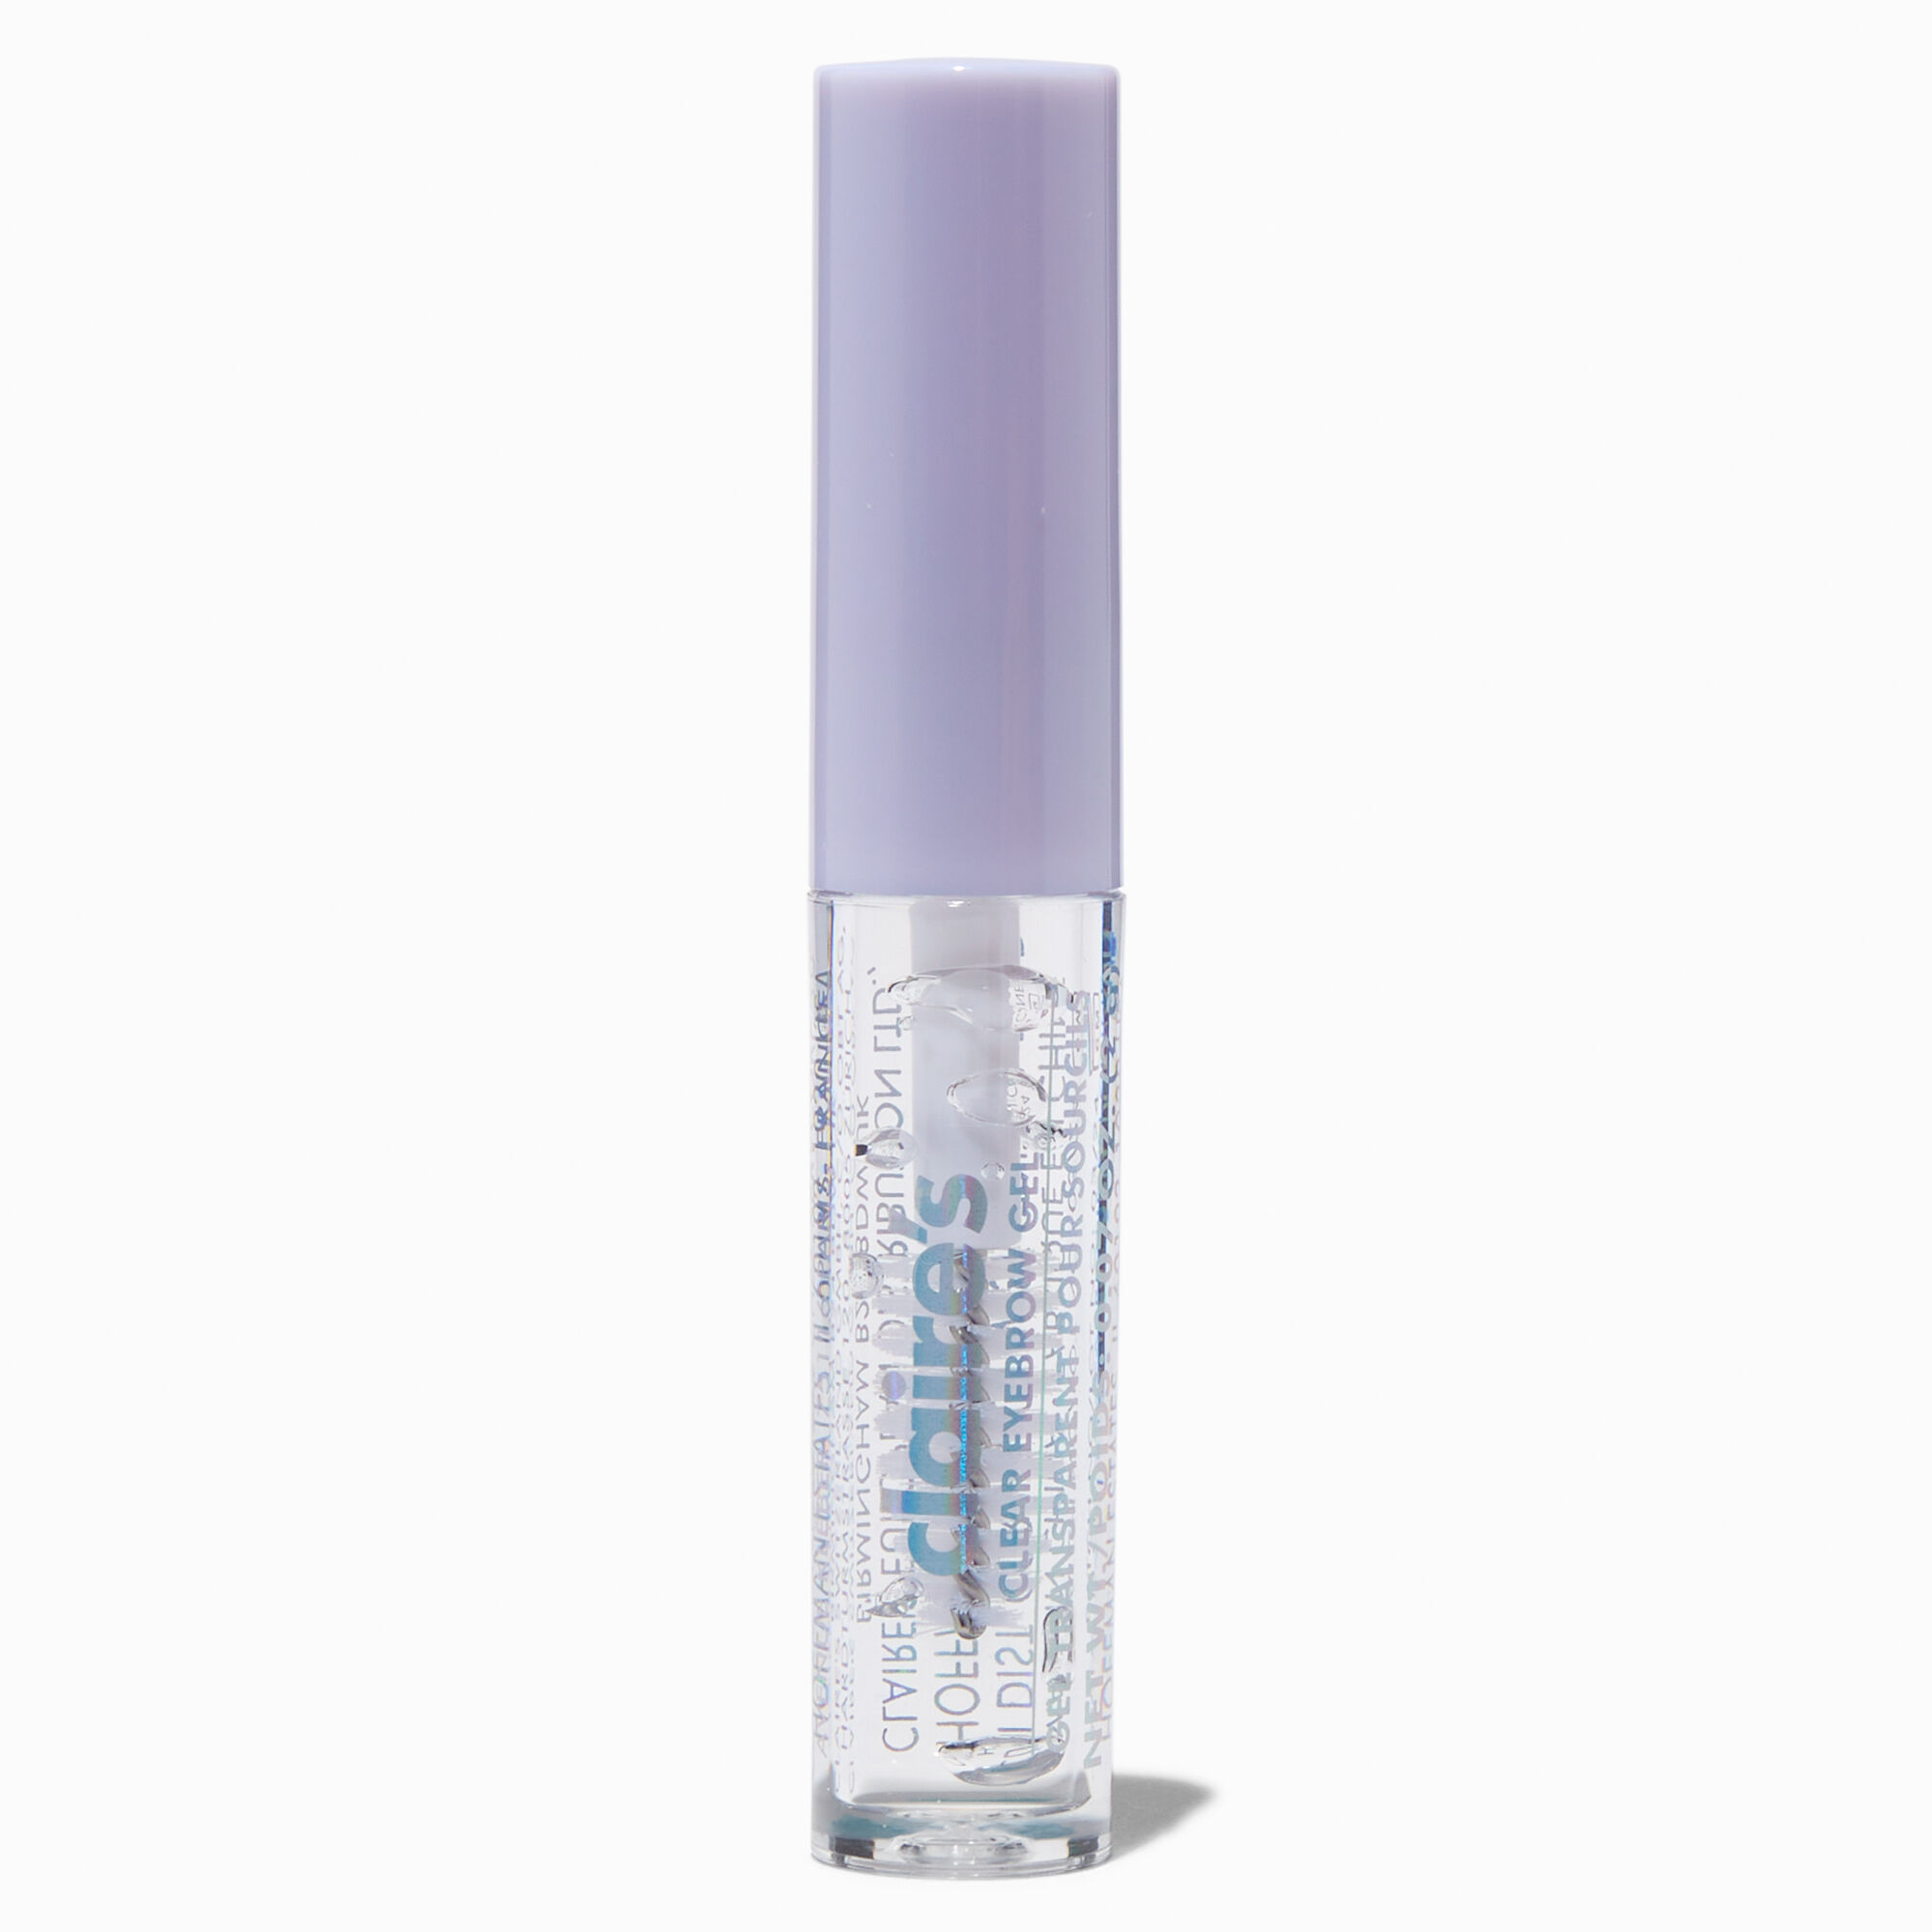 View Claires Clear Eyebrow Gel information